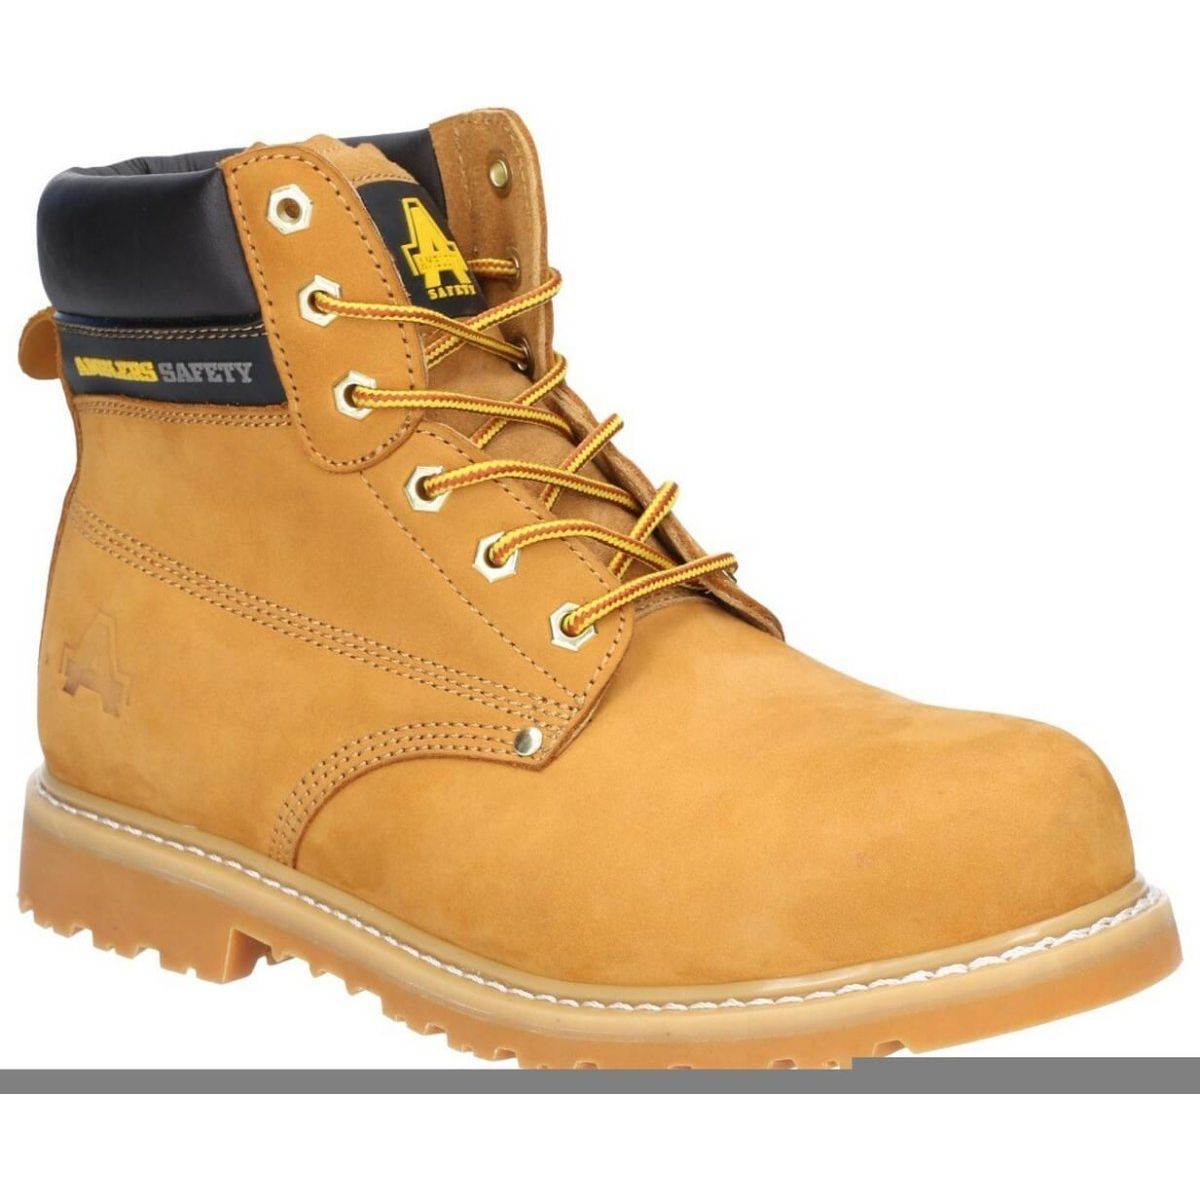 Amblers Fs7 Goodyear Welted Safety Boots Womens - workweargurus.com